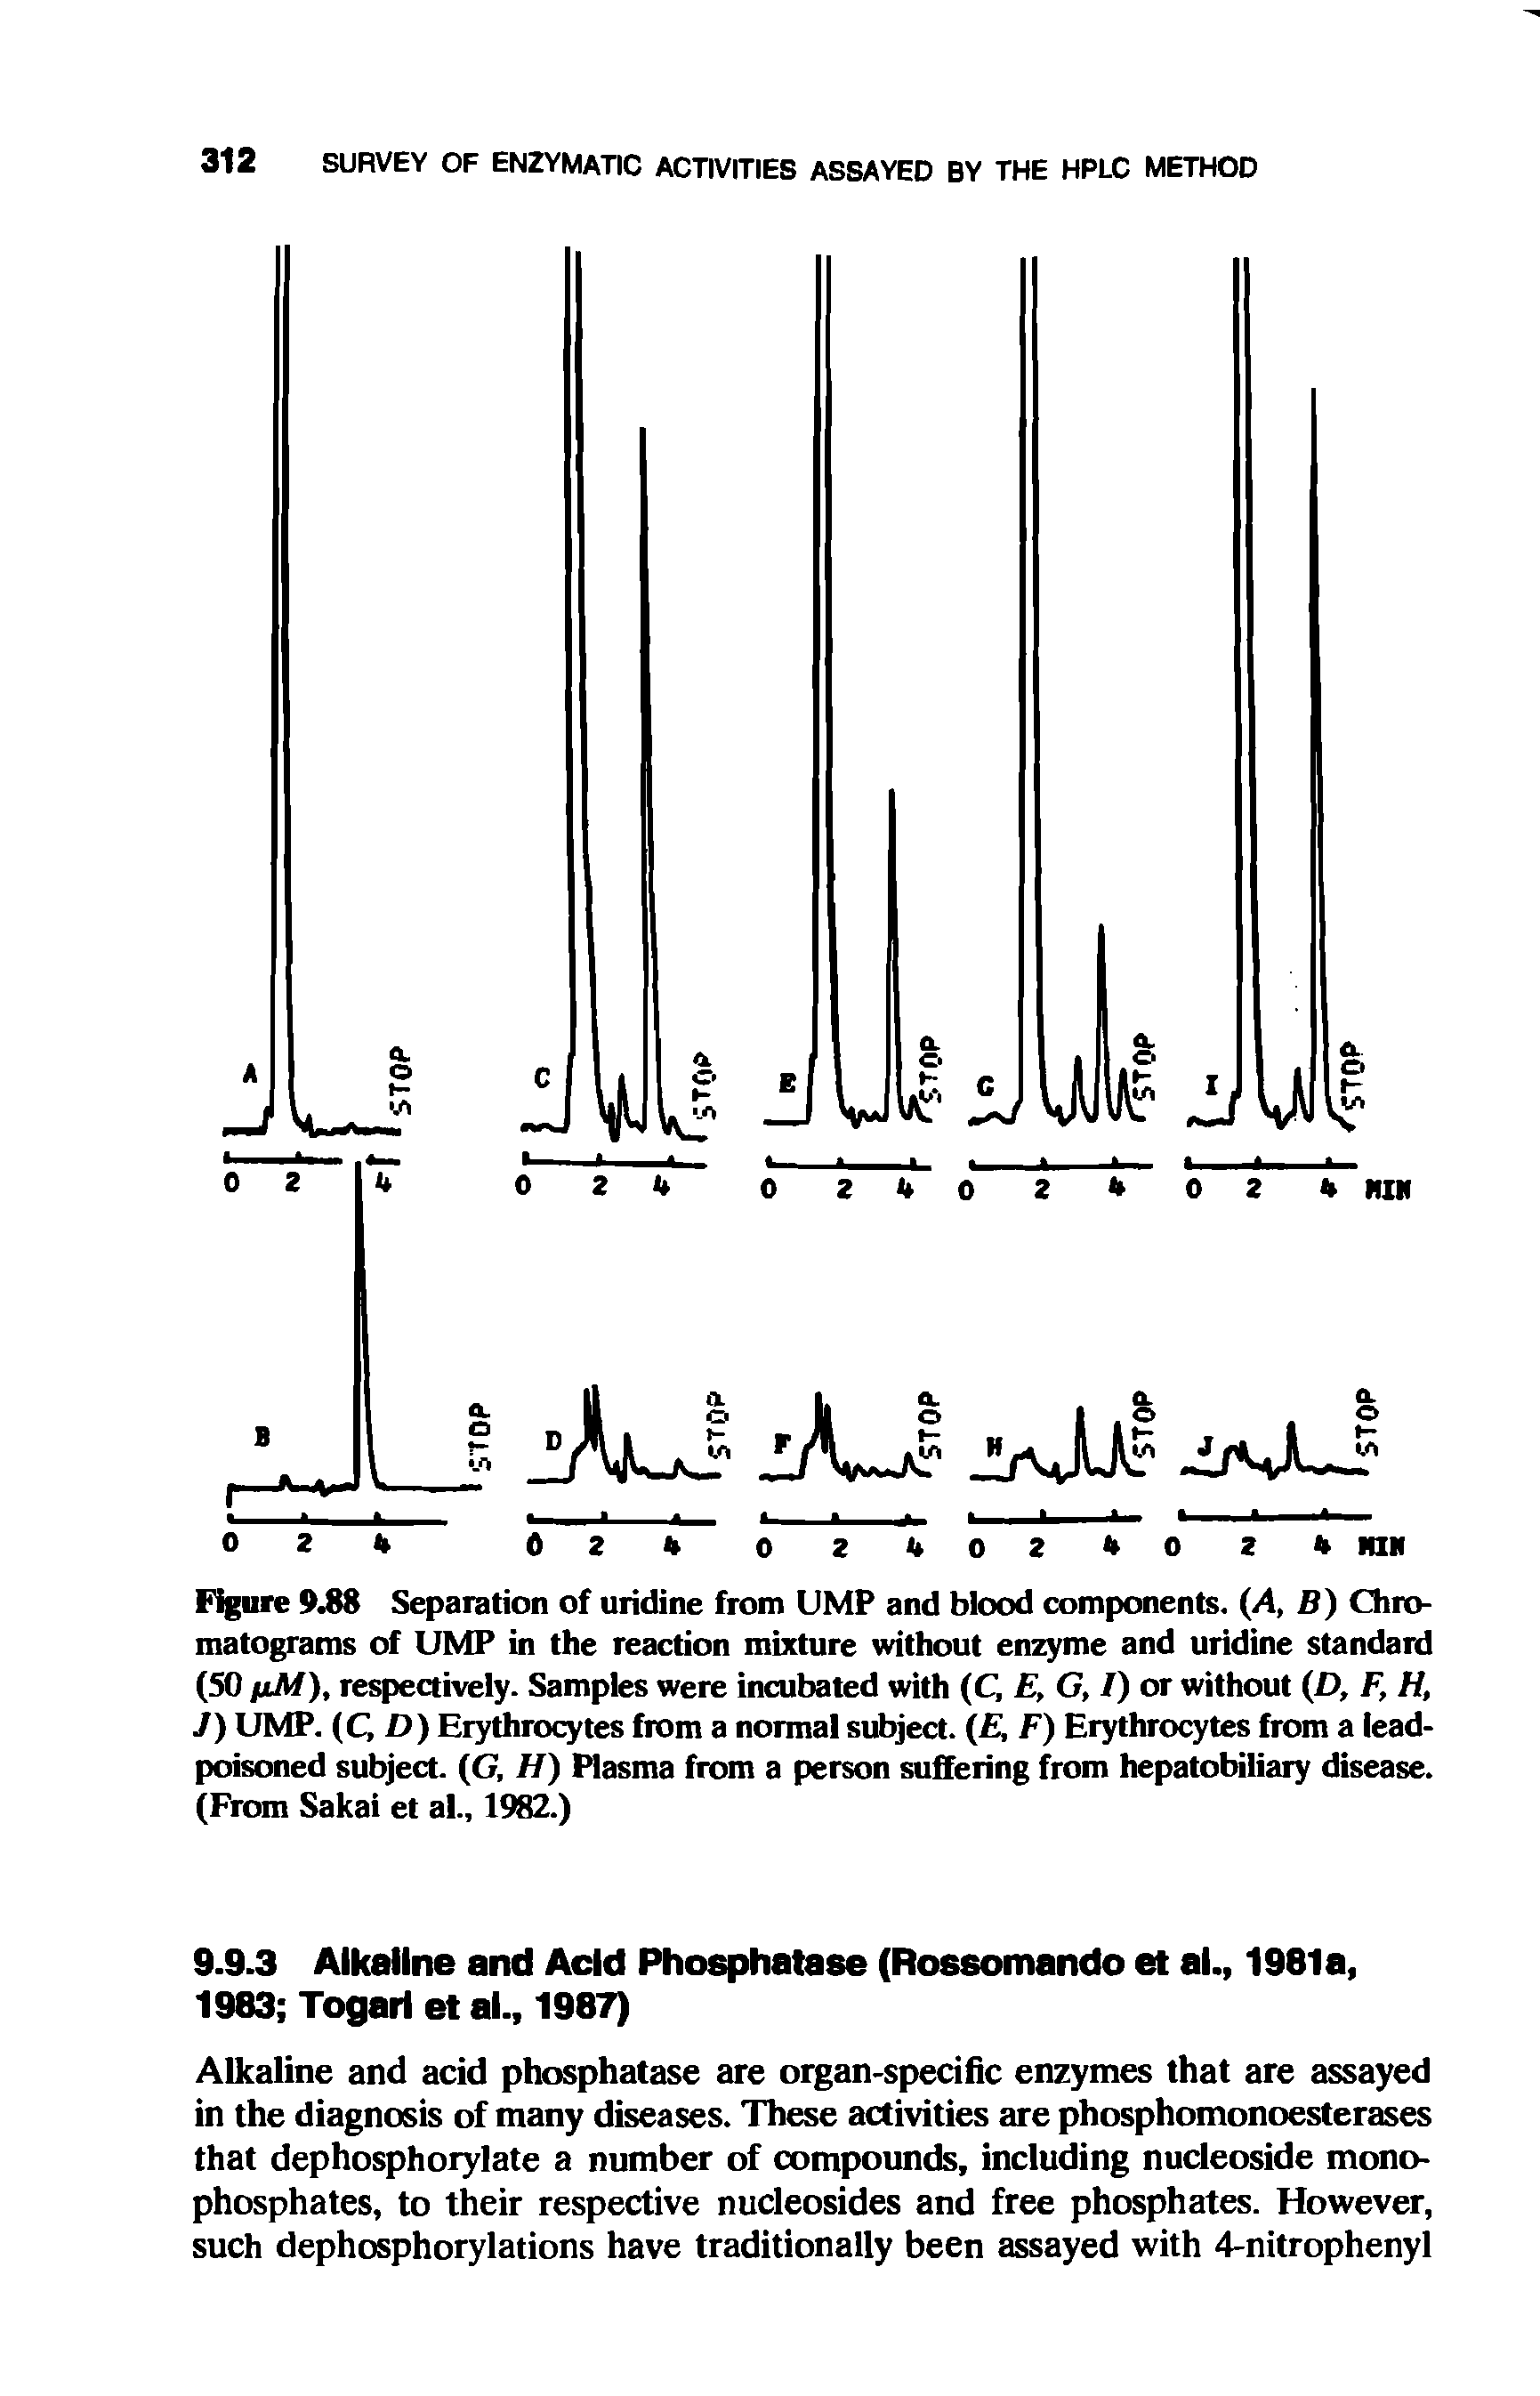 Figure 9.88 Separation of uridine from UMP and blood components. (A, B) Chromatograms of UMP in the reaction mixture without enzyme and uridine standard (50 fiM), respectively. Samples were incubated with (C, E, G, /) or without (D, F, H, J) UMP. QD) Erythrocytes from a normal subject. ( , F) Erythrocytes from a lead-poisoned subject. (G, H) Plasma from a person suffering from hepatobiliary disease. (From Sakai et al., 1982.)...